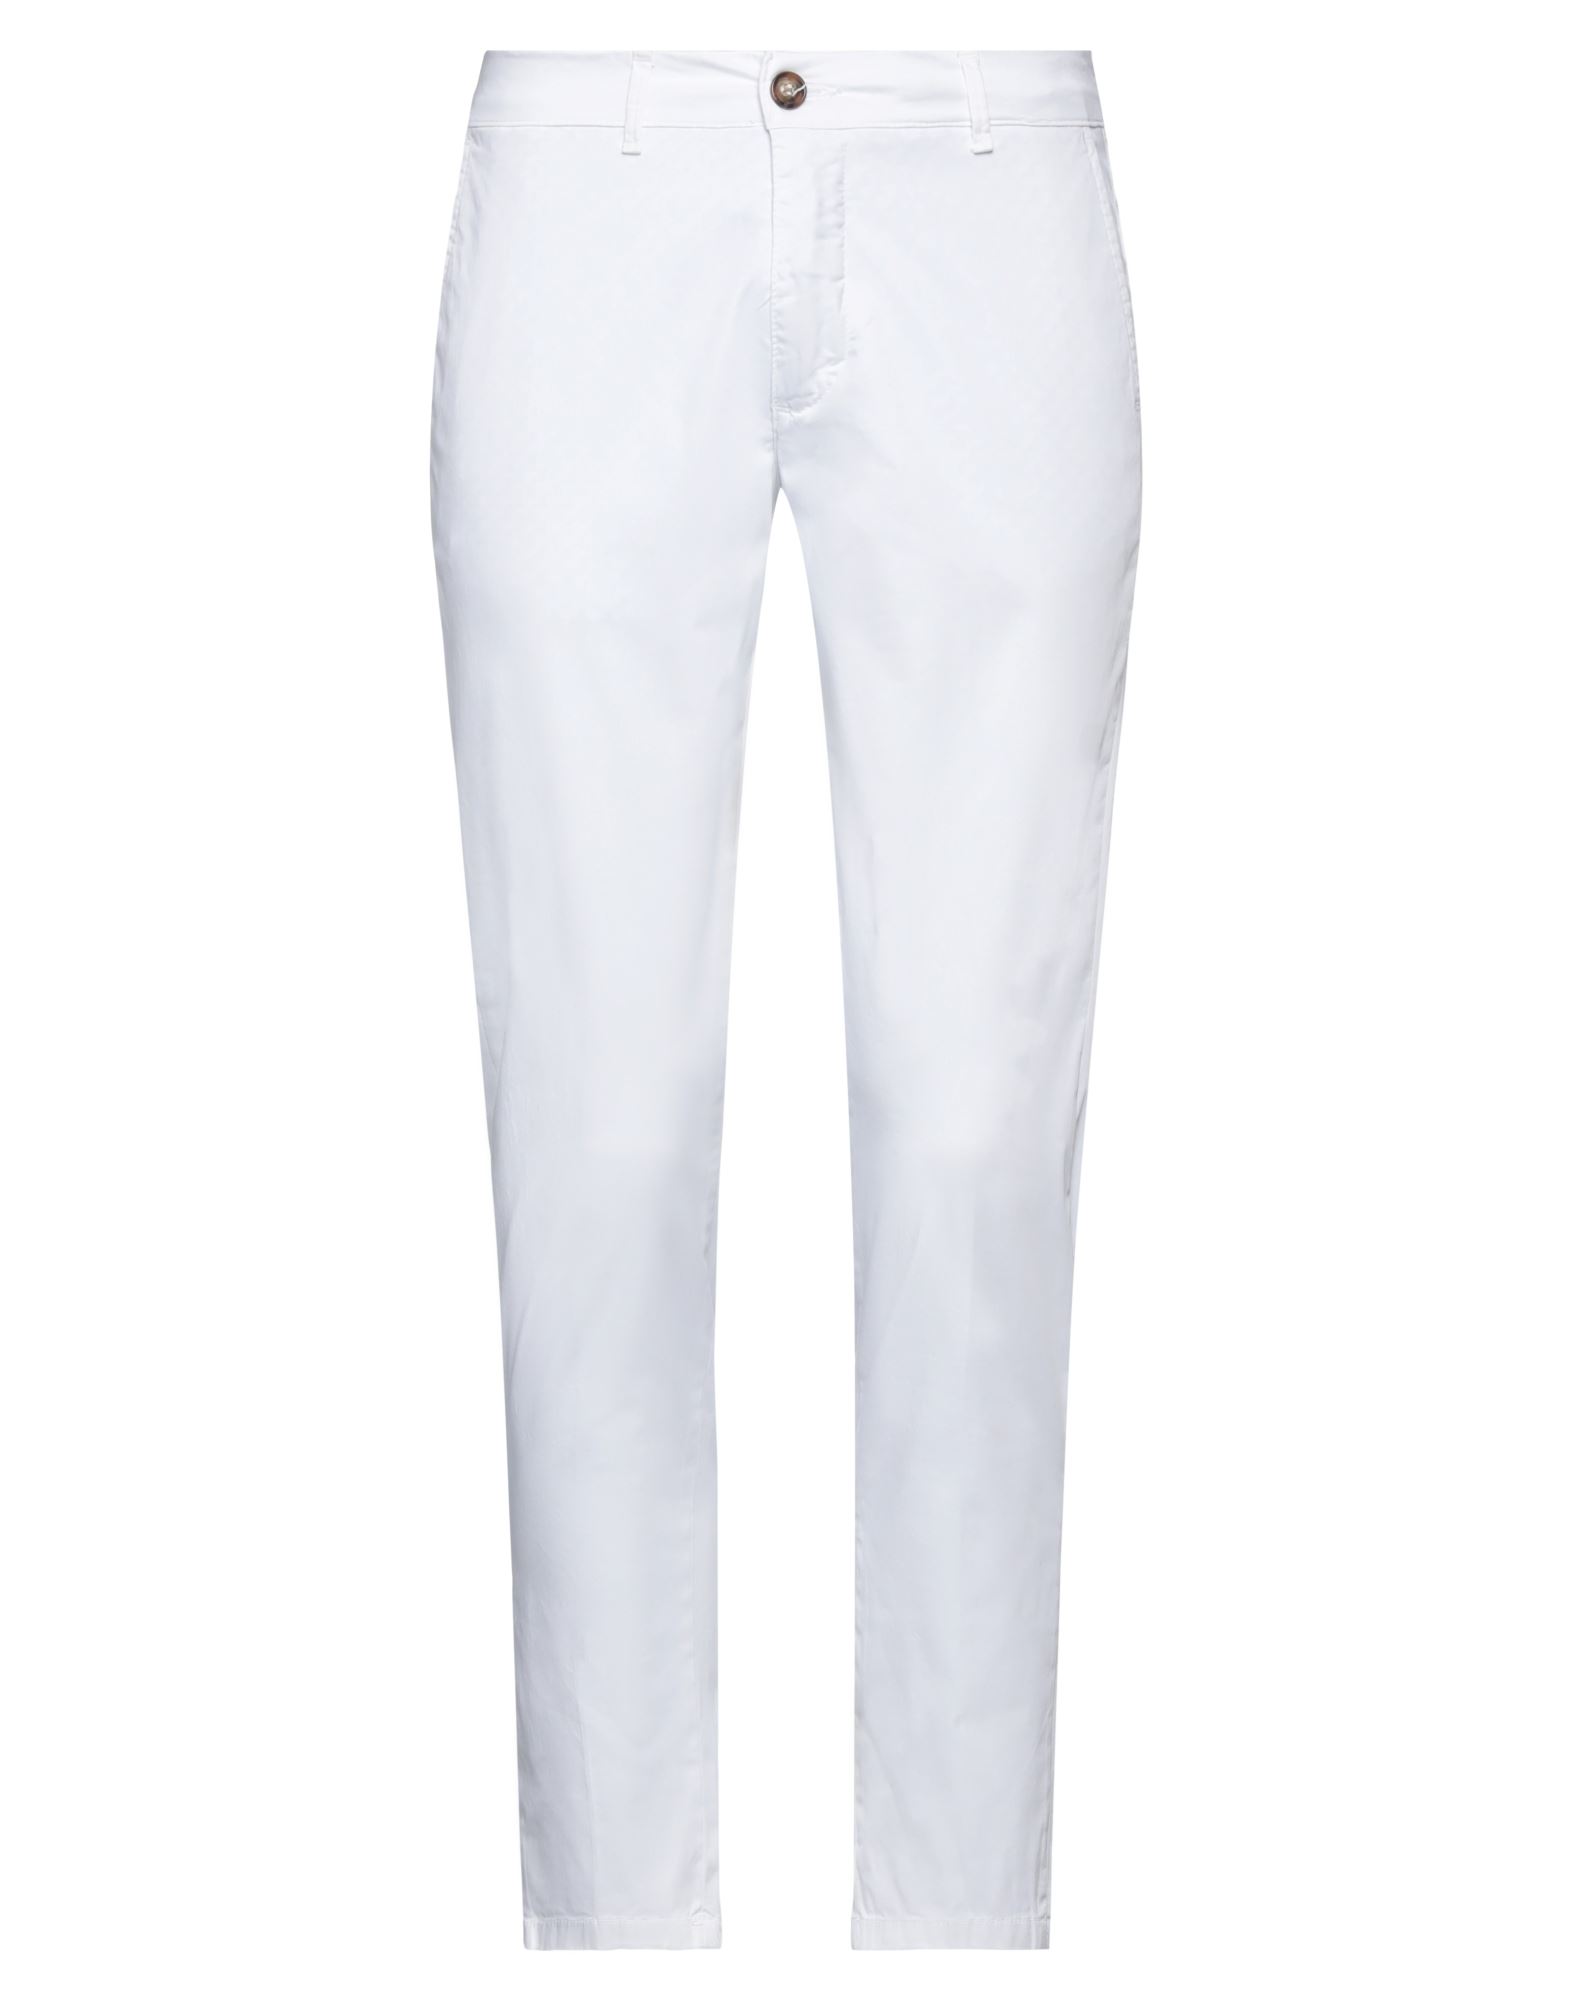 Besilent Pants In White